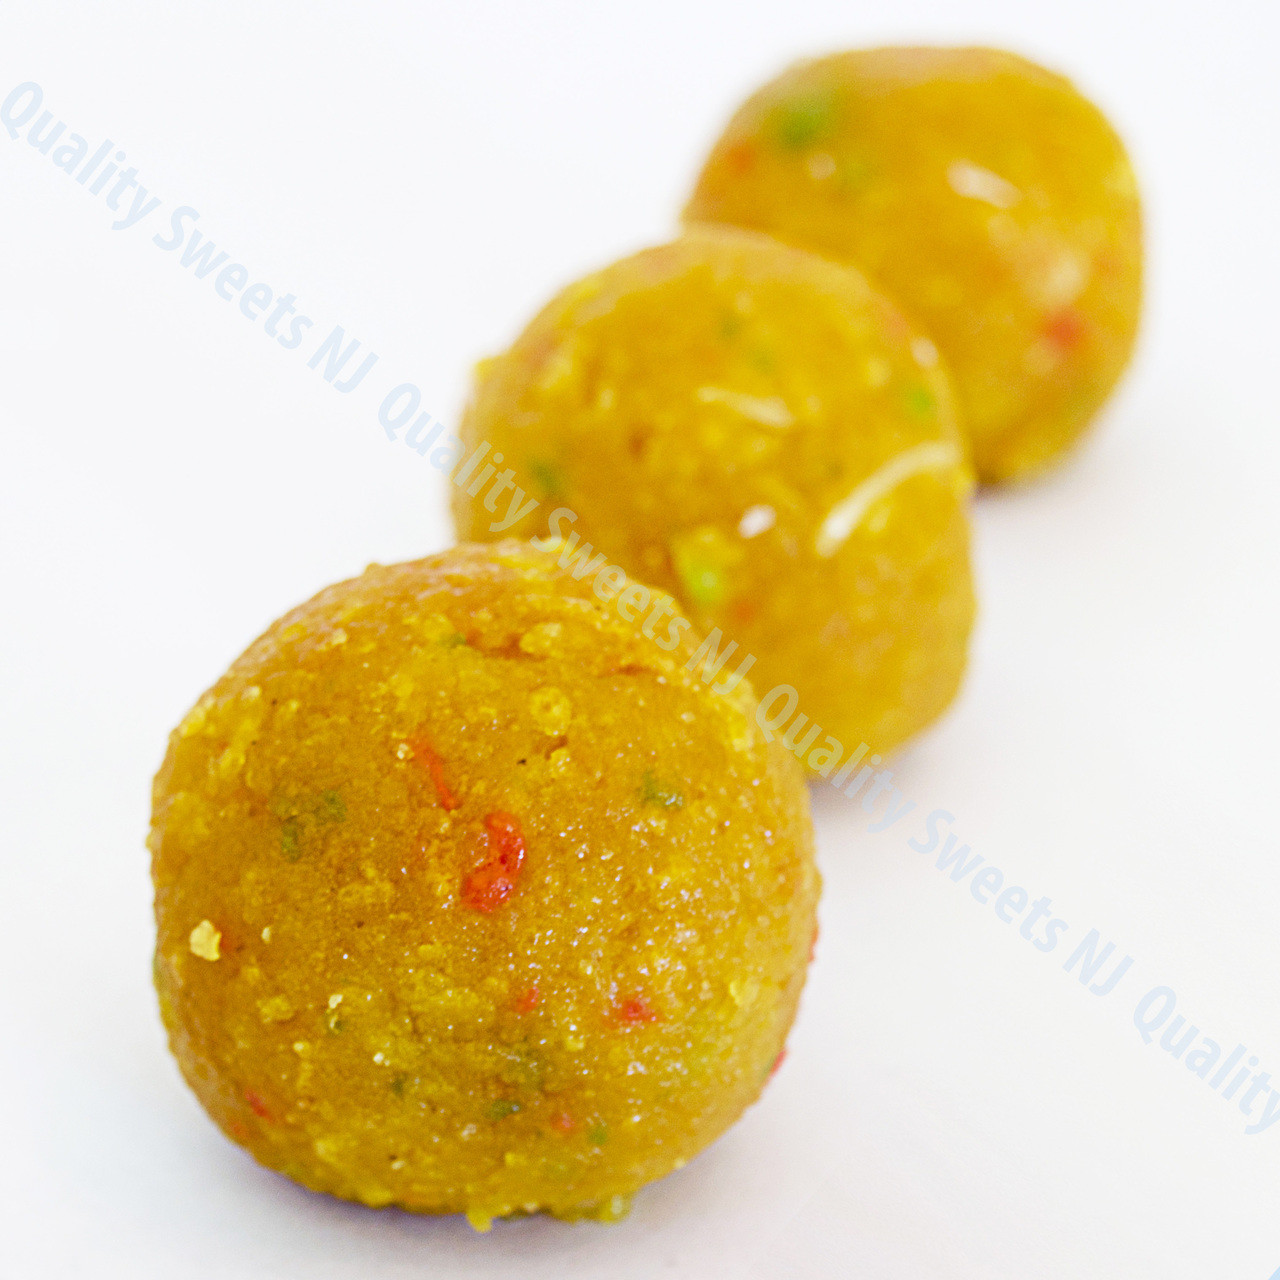 Motichur Ladoo - Quality Indian Sweets - Taste The Tradition